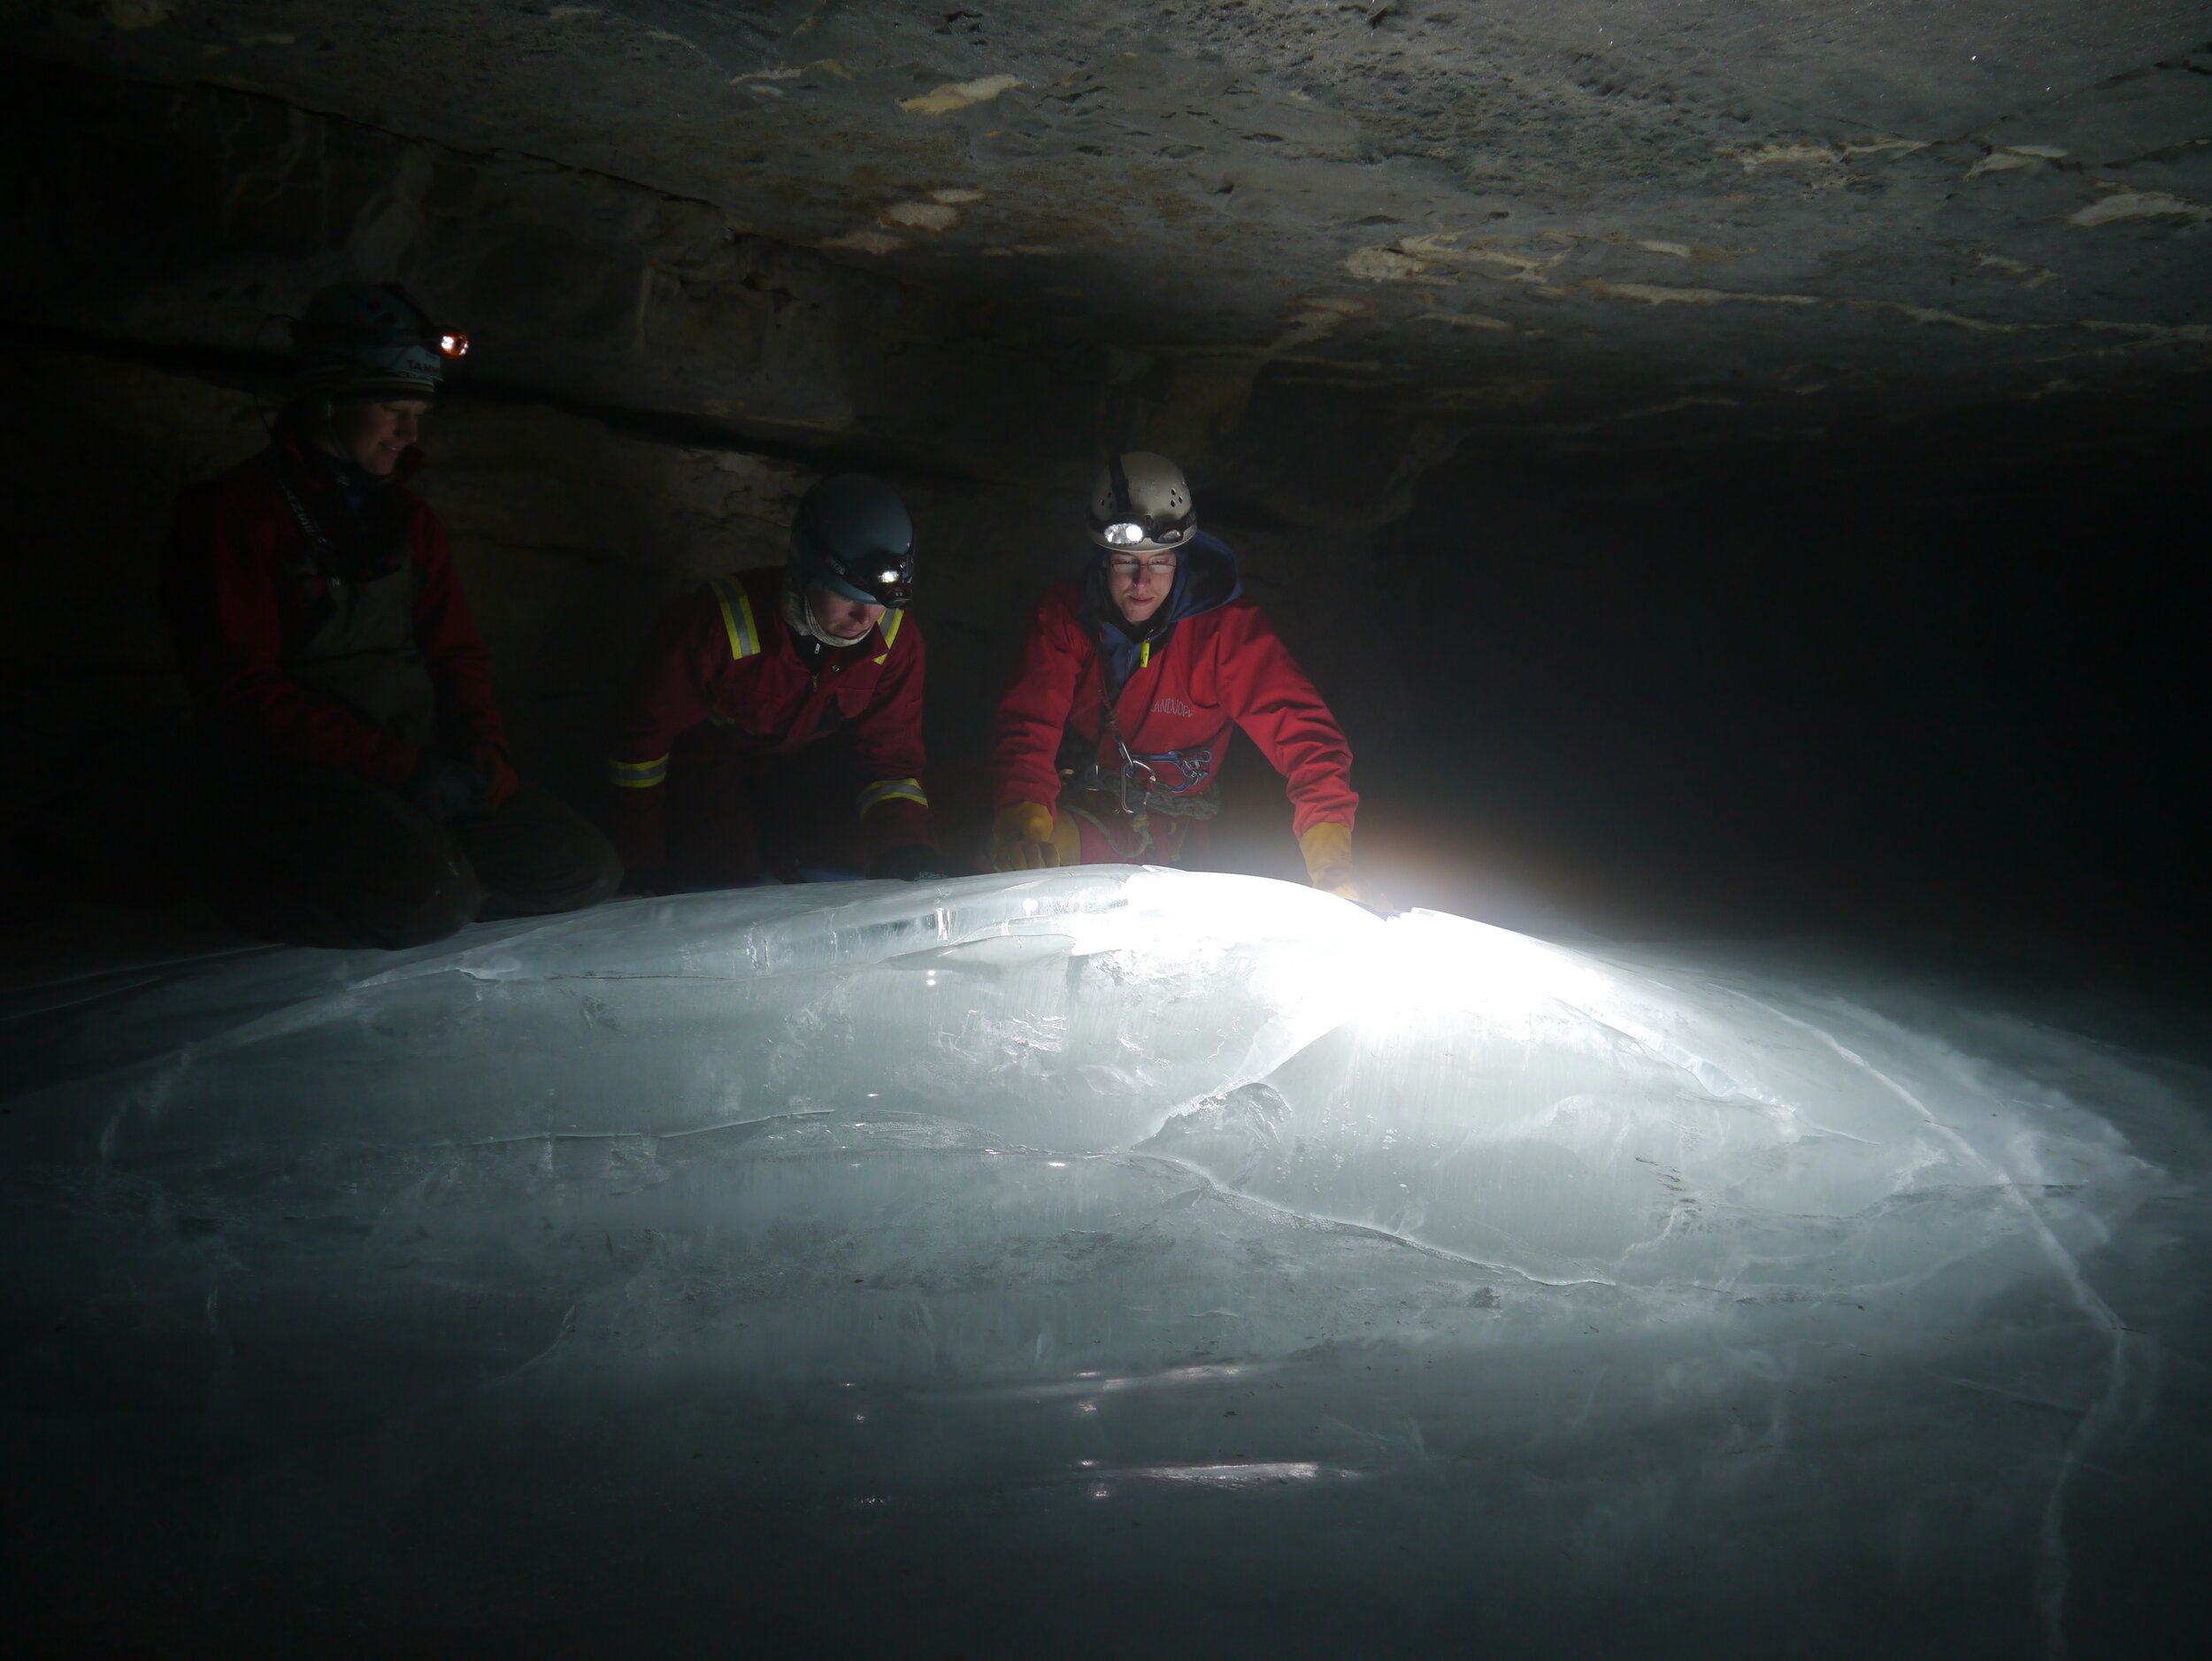 Tammera Kostya, Alyssa Horn, and Chris Coxson at an ice pingo in Castleguard Cave Photo: C. Stenner 2012